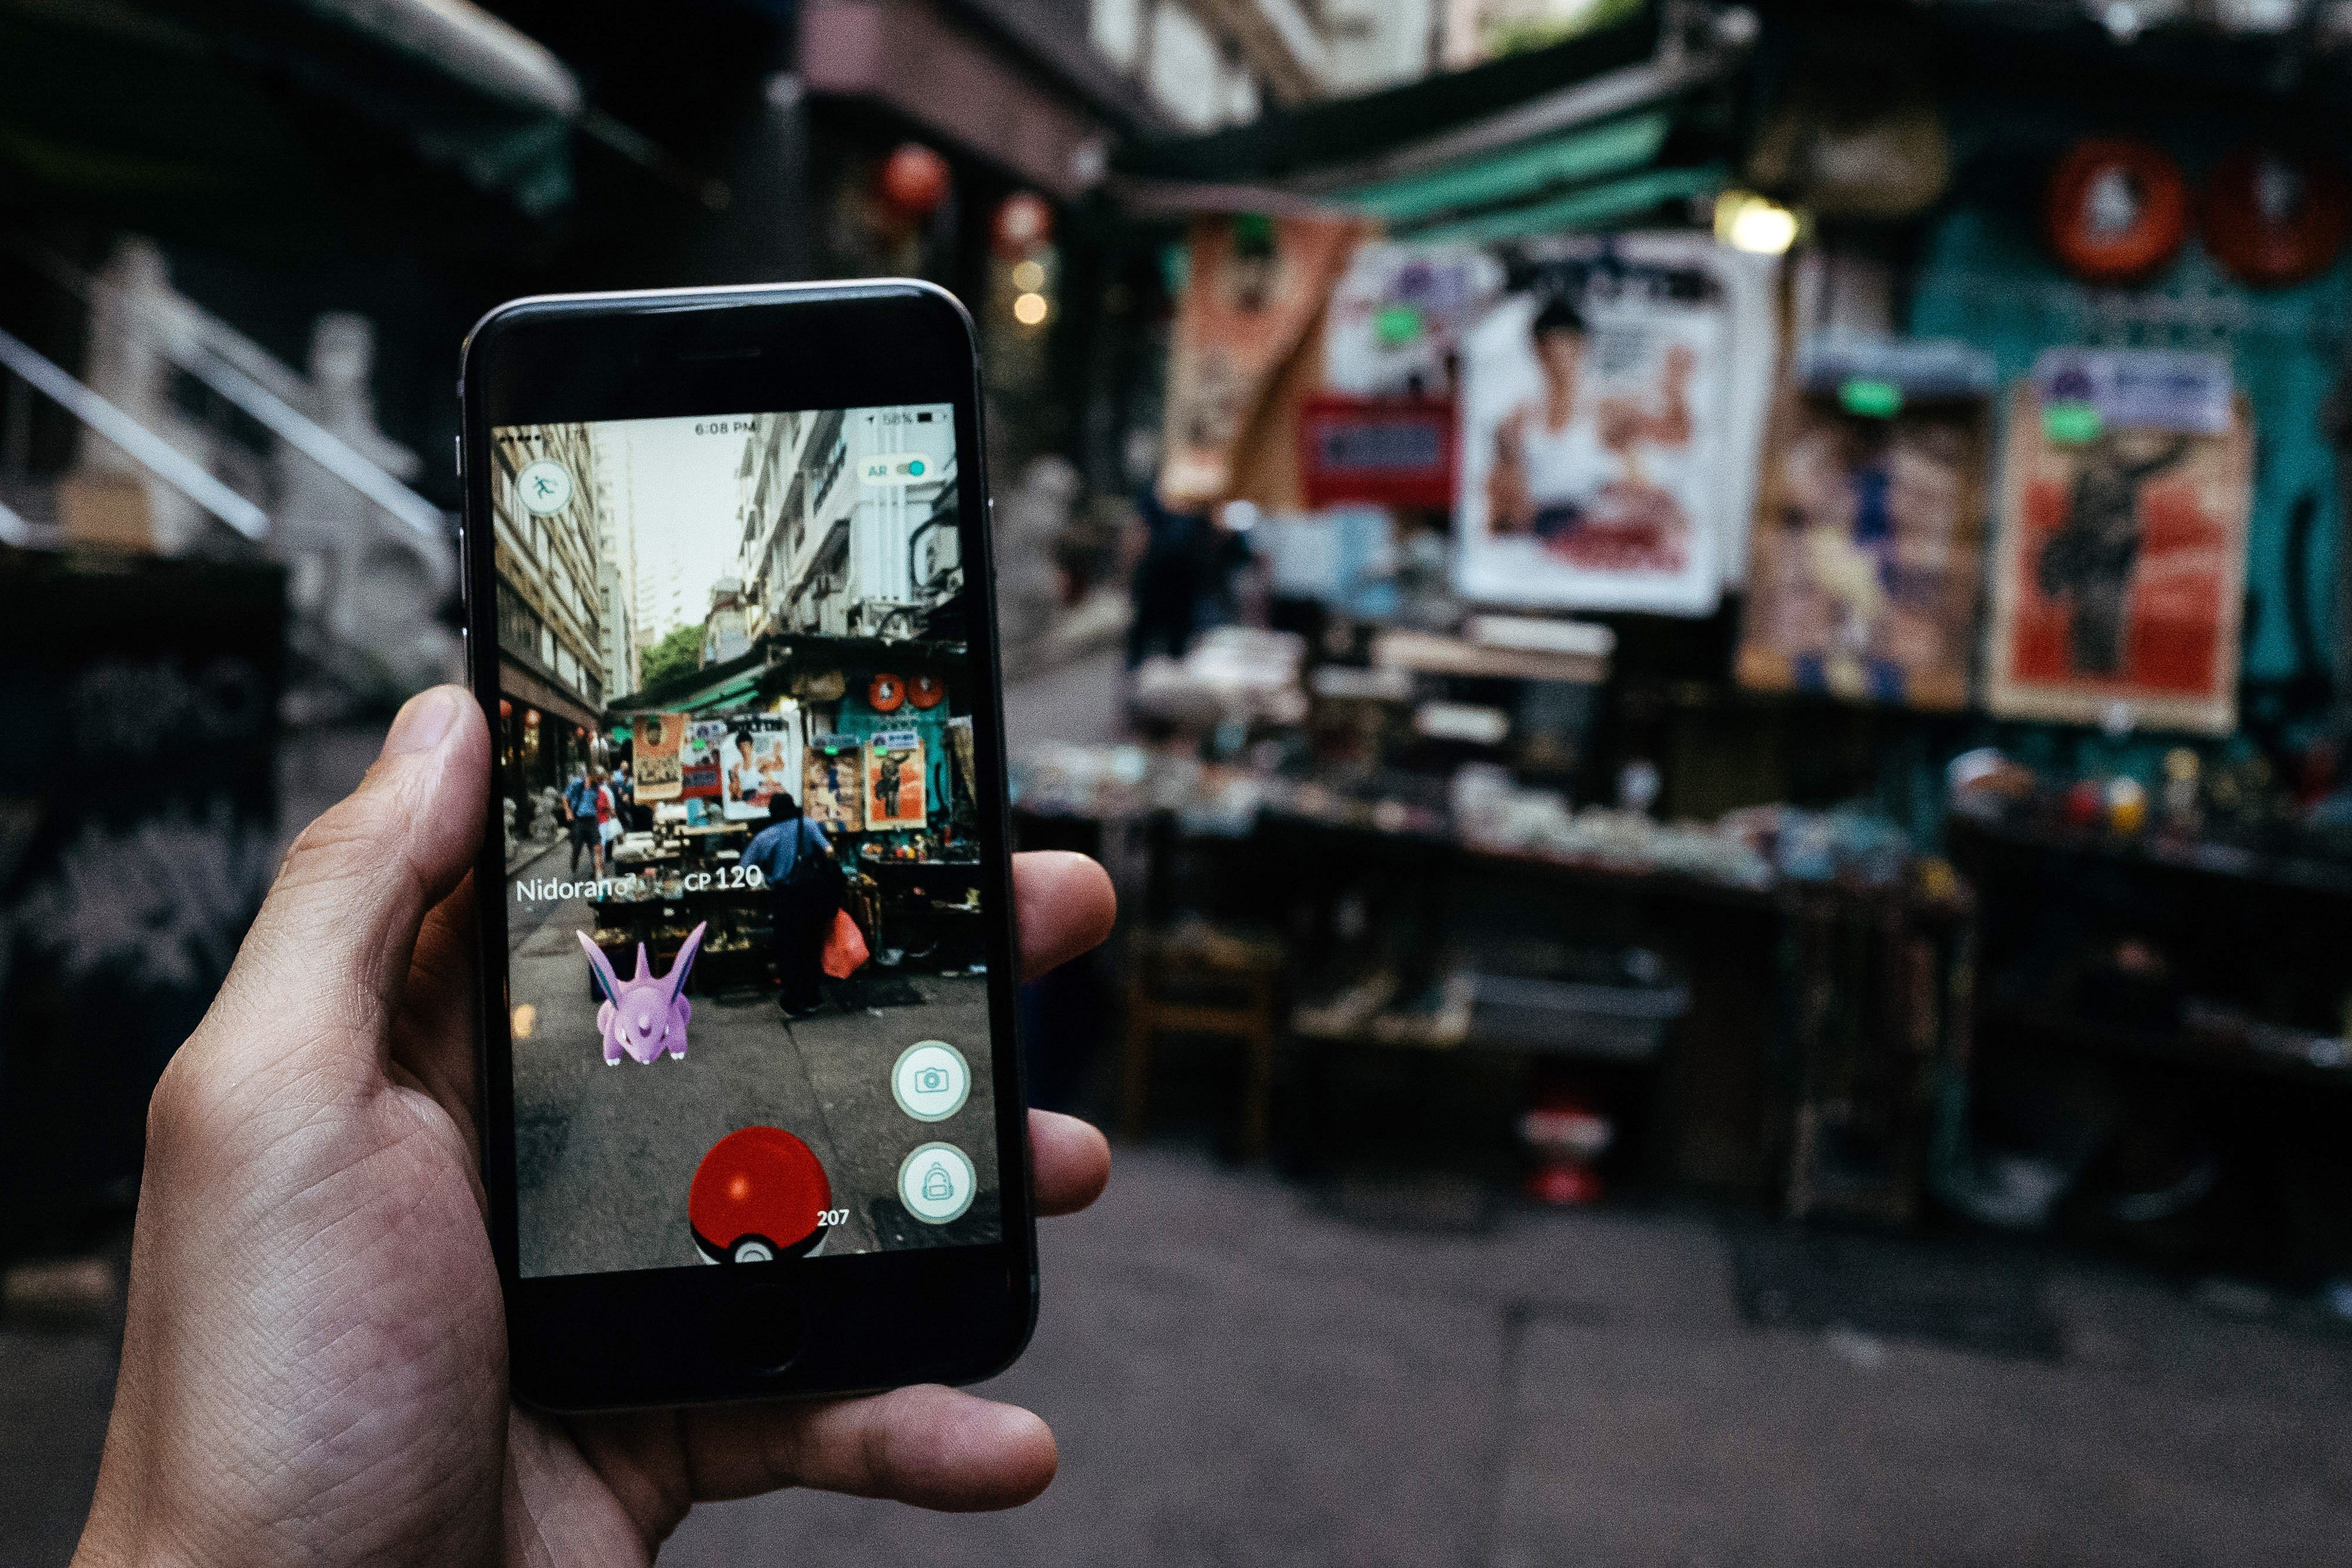 A player tries to catch the Nidoran character of Pokémon Go. Photo: Bloomberg